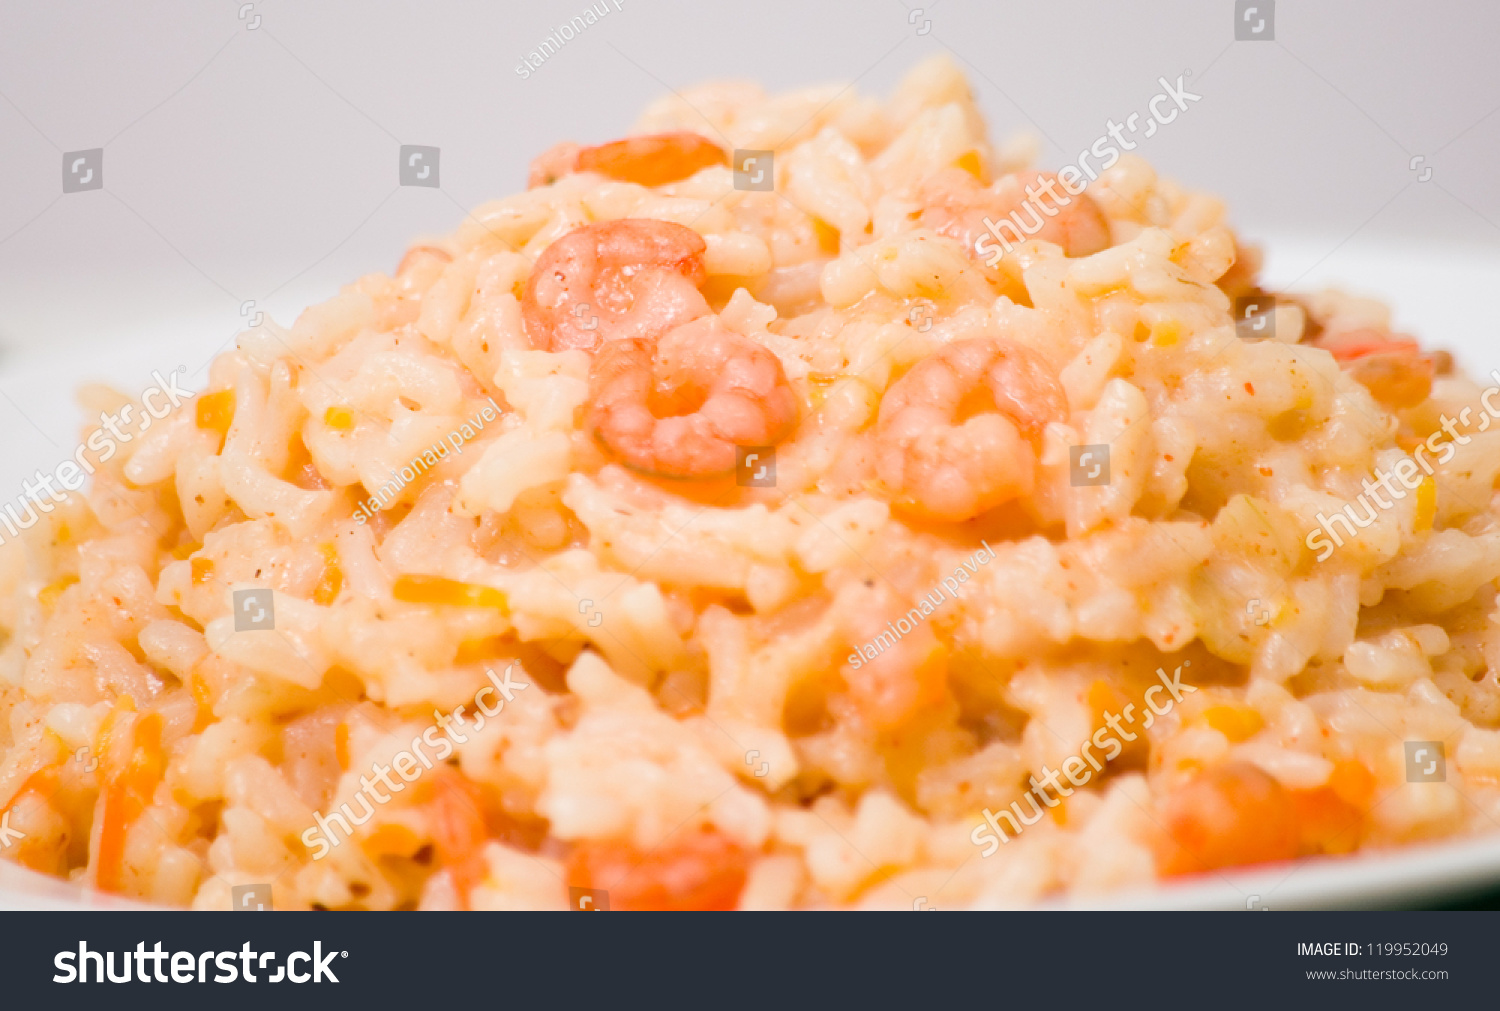 Plate of Shrimps Risotto #119952049